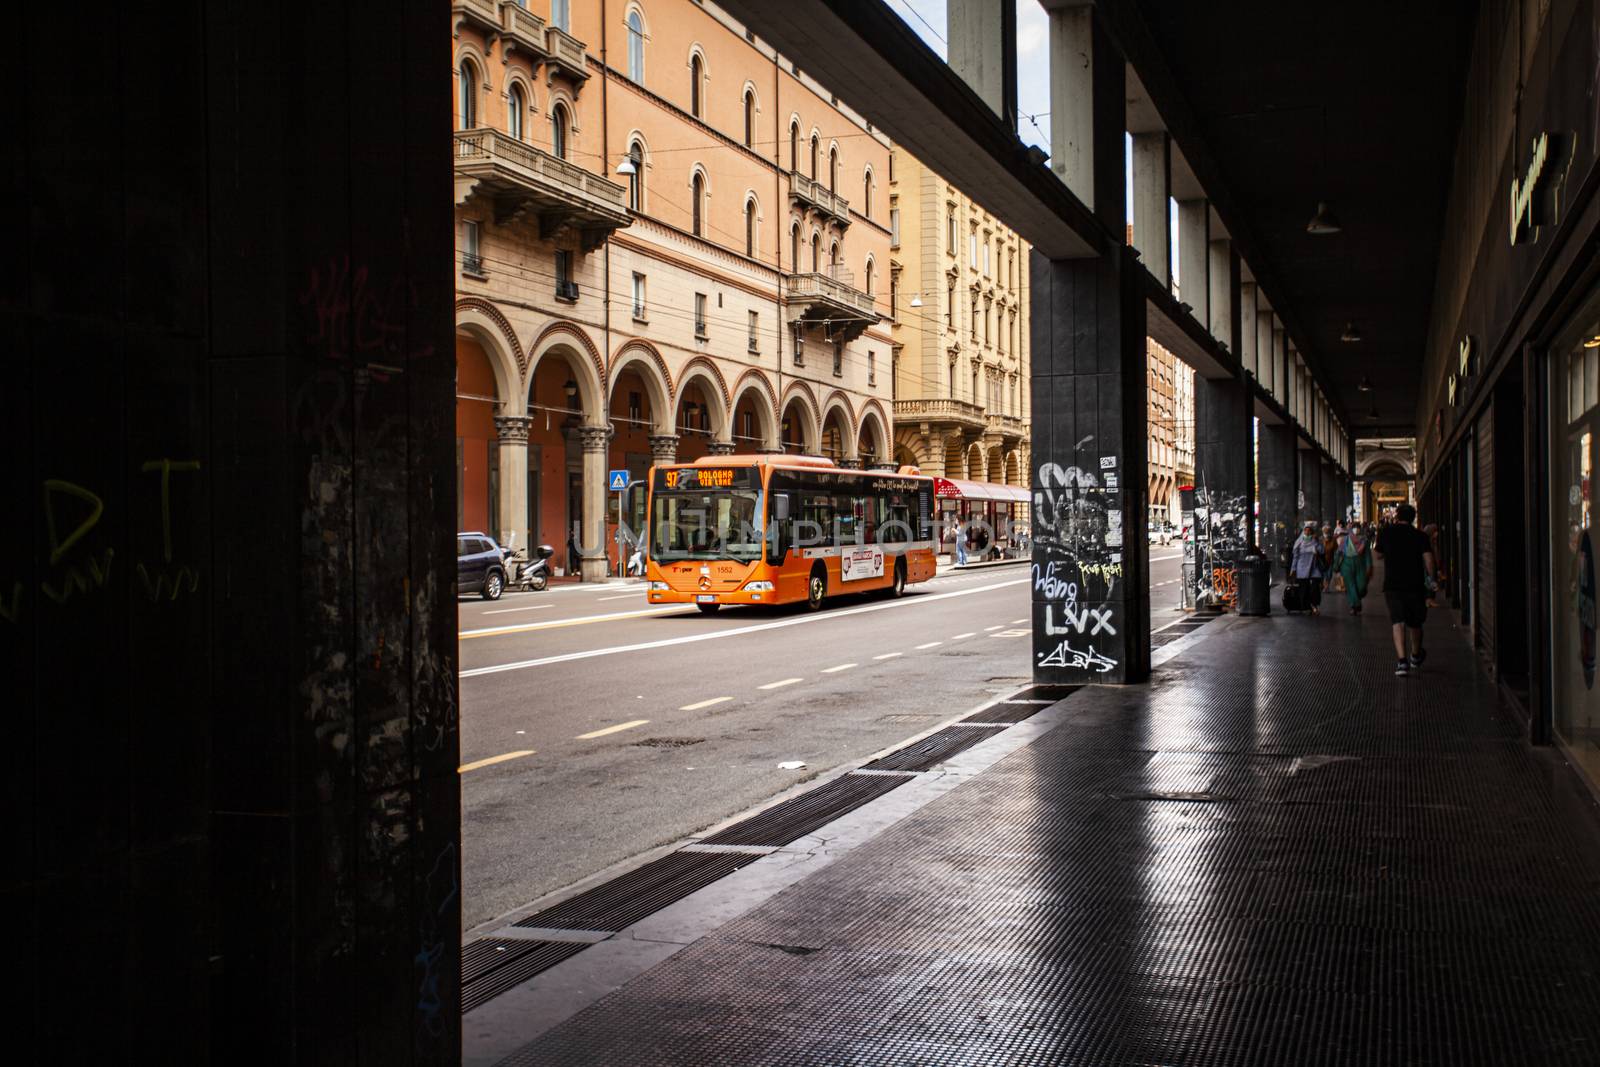 BOLOGNA, ITALY 17 JUNE 2020: Bus on the streets of Bologna, Italy